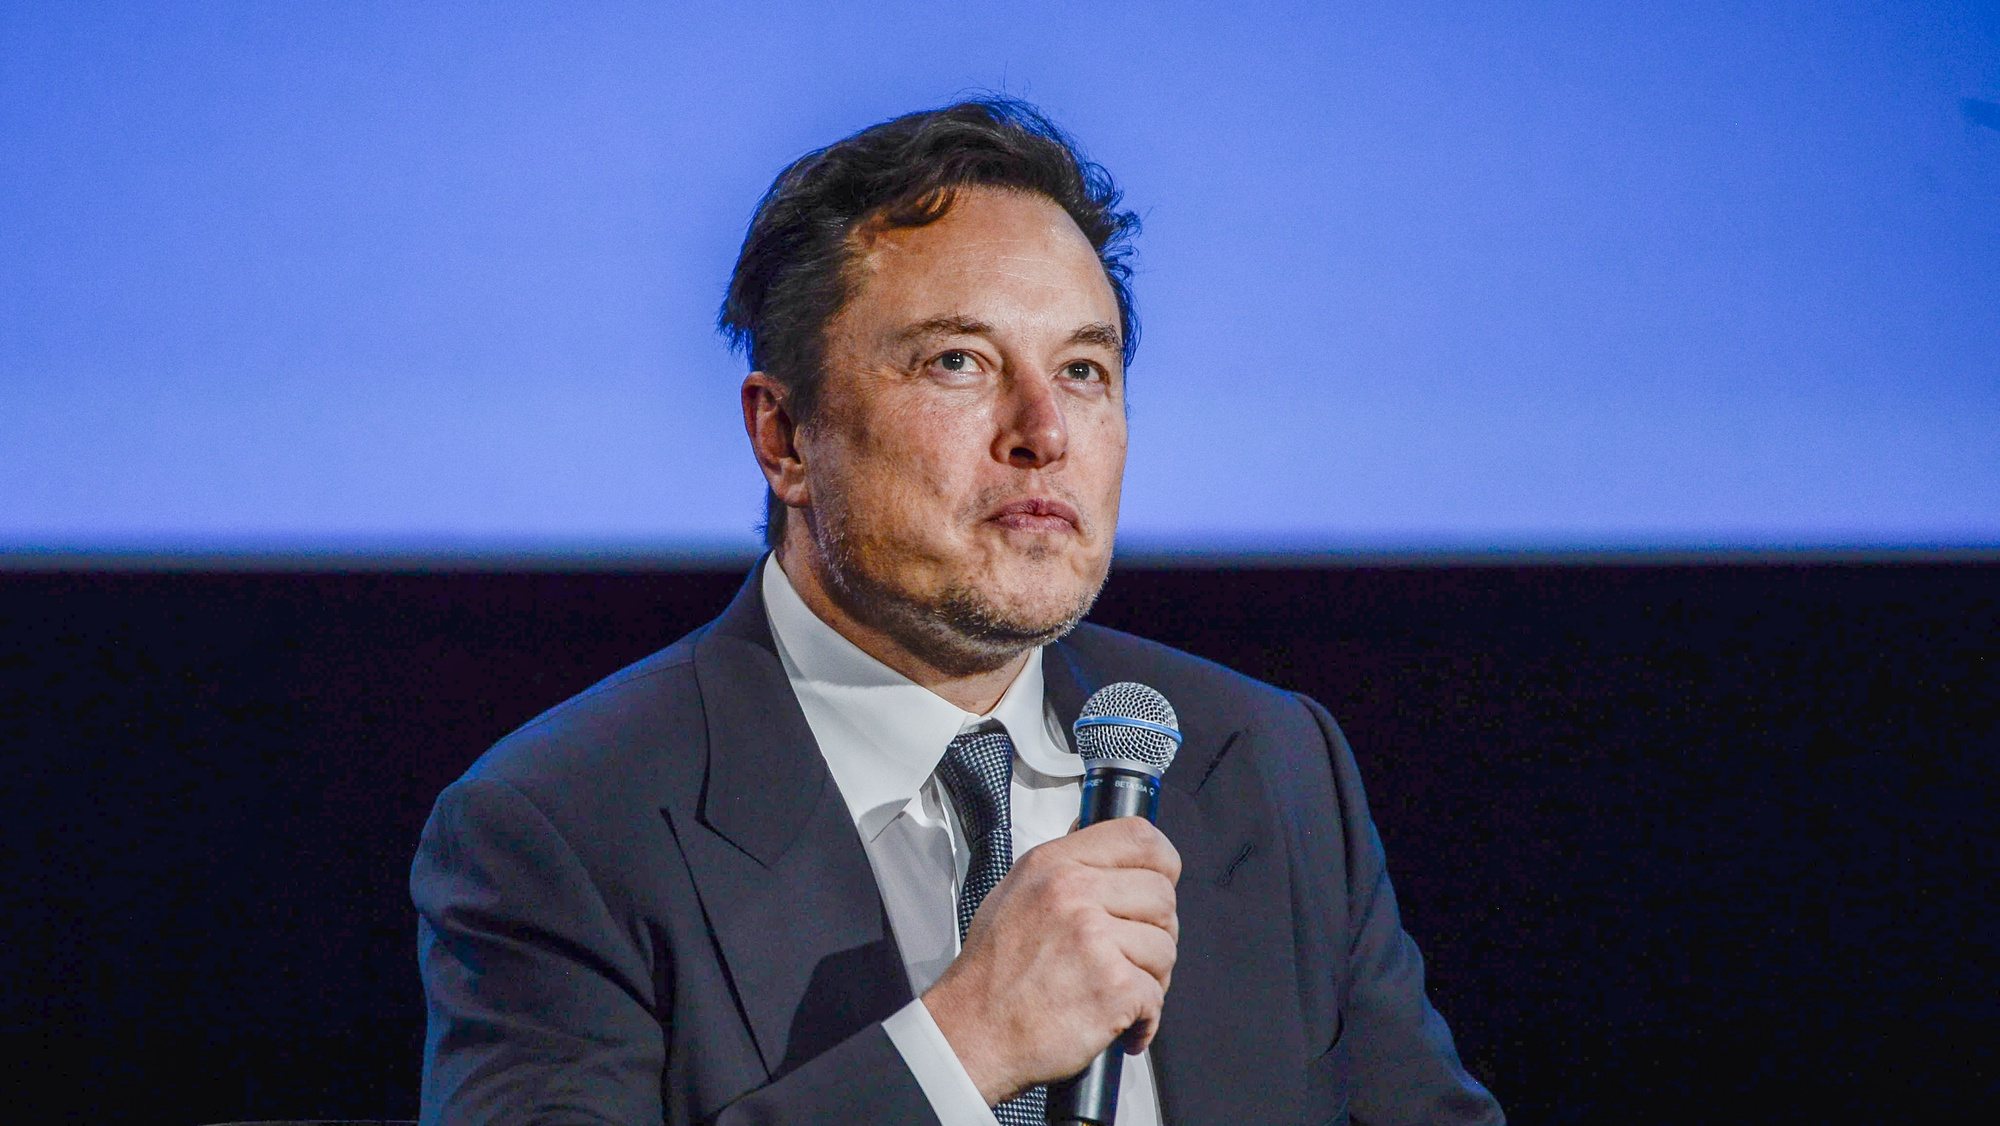 epa10144986 Tesla-founder Elon Musk speaks at a discussion forum during the Offshore Northern Seas (ONS) Conference, in Stavanger, Norway, 29 August 2022. The ONS is taking place from 29 August to 01 September 2022 and brings together international industry executives to discuss on &#039;the future of the energy industry, including new technologies, new forms of leadership and new business models&#039;, as the organizers describes it on their website.  EPA/Carina Johansen NORWAY OUT